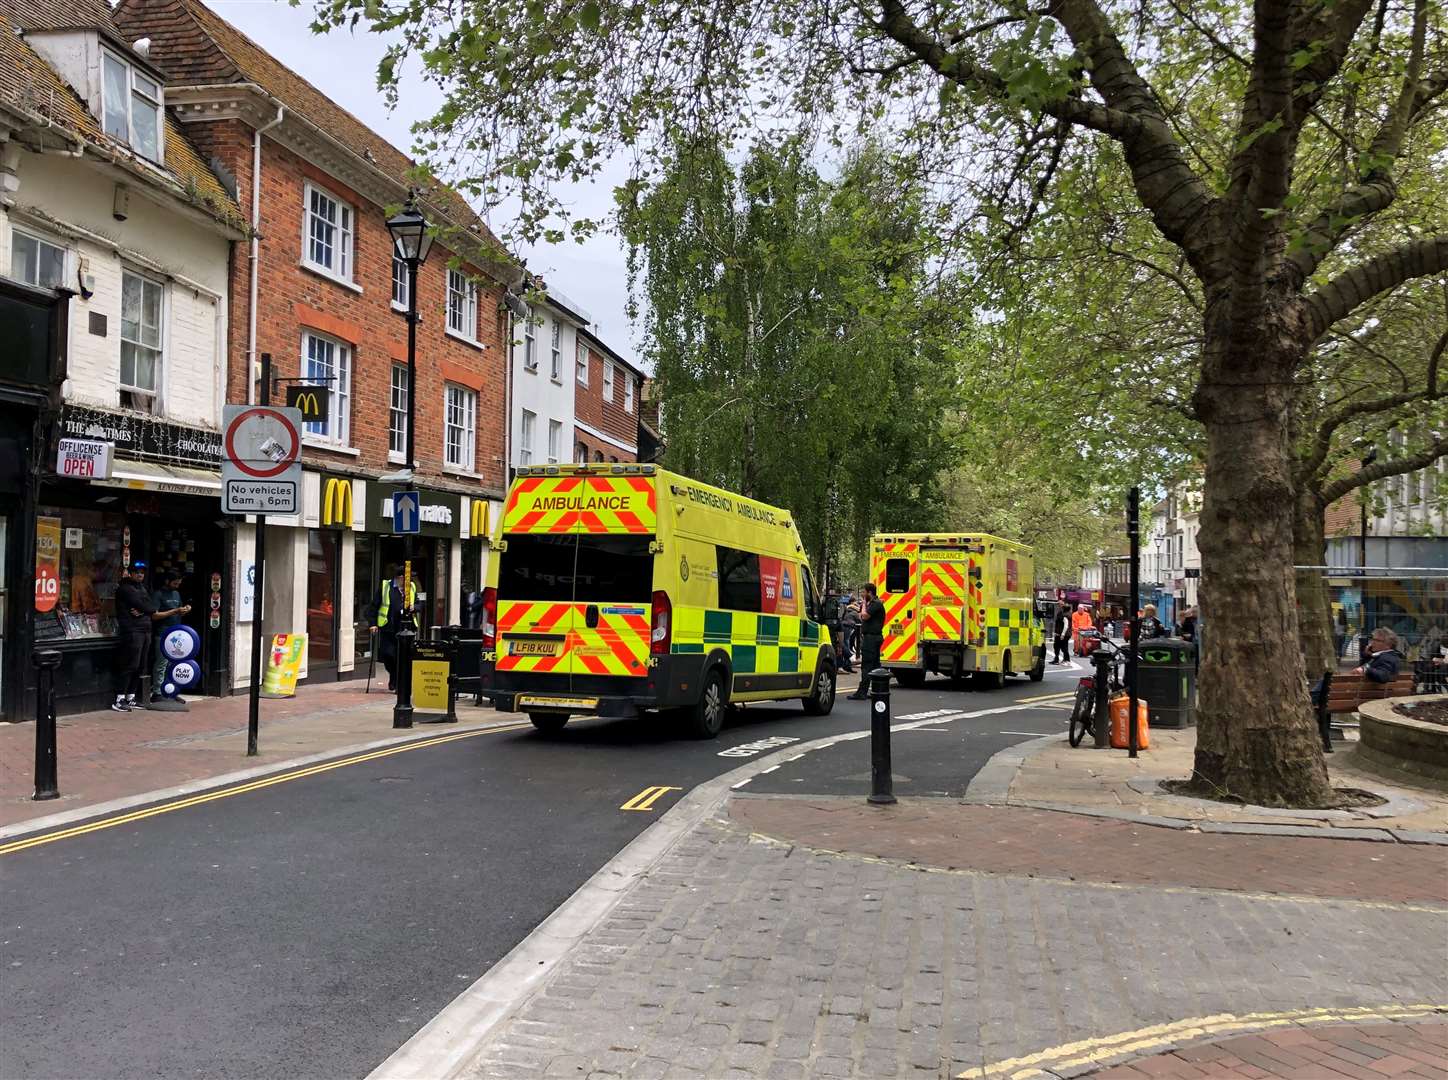 Ambulance crews treated a person after they collapsed in Lower High Street, Ashford this afternoon, close to McDonald’s